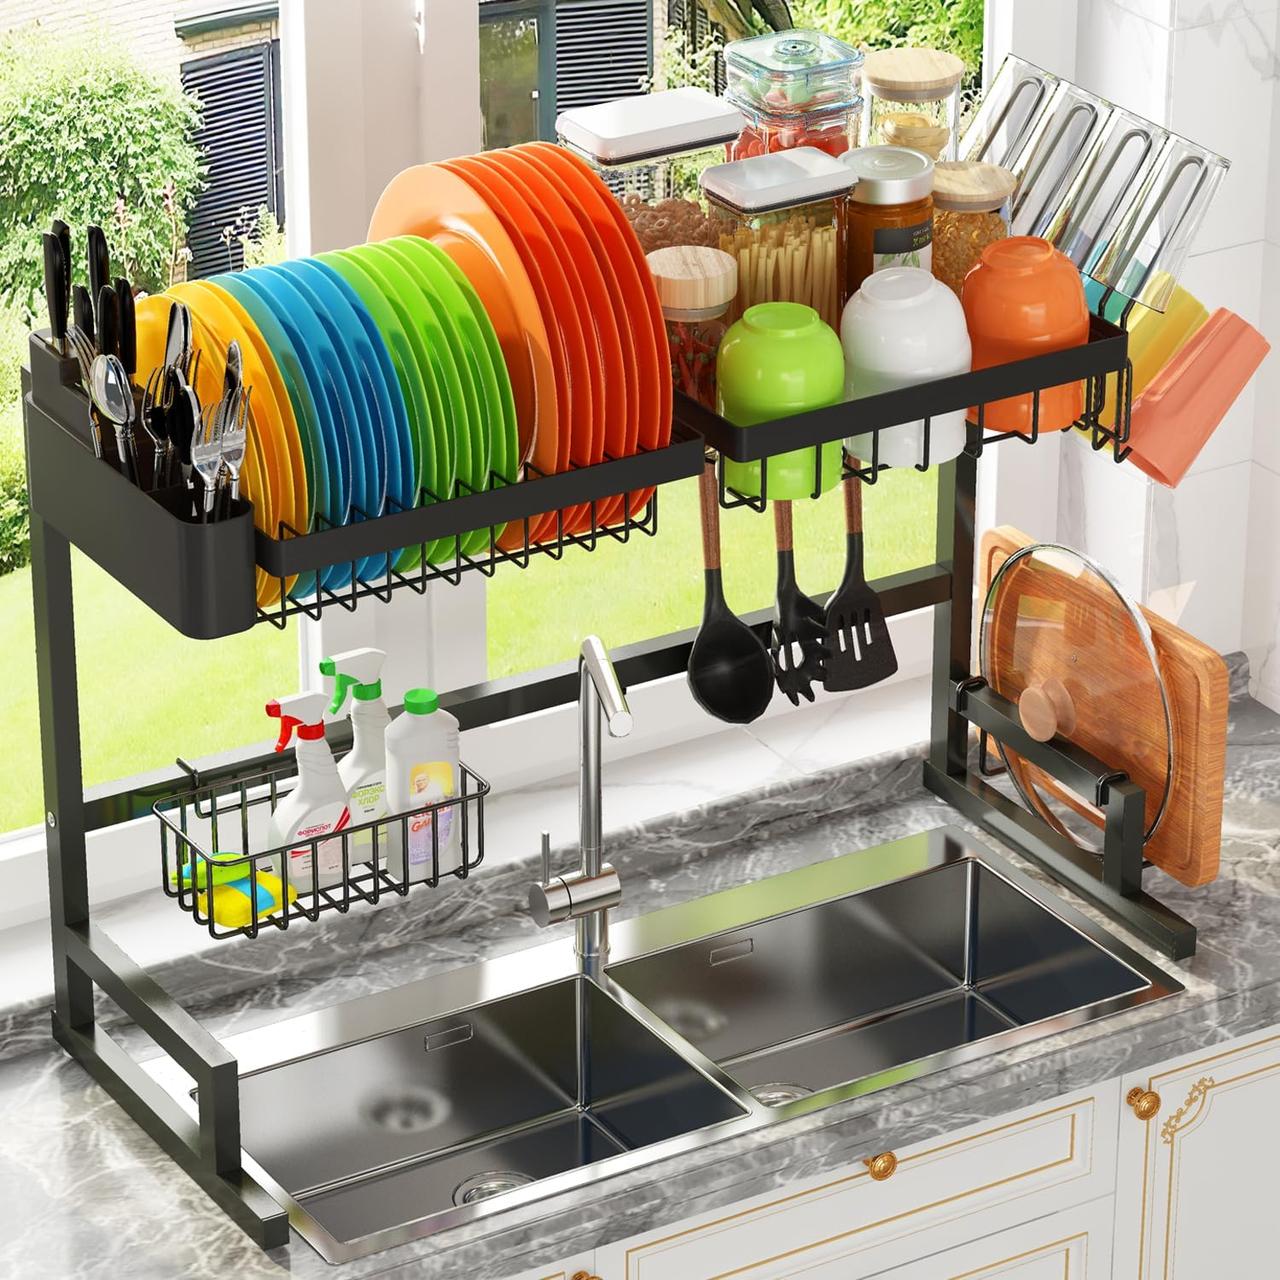 ADBIU Over The Sink Dish Drying Rack (Expandable Height and Length) Snap-On Design 2 Tier Large Dish Rack - фото 1 - id-p2180711540